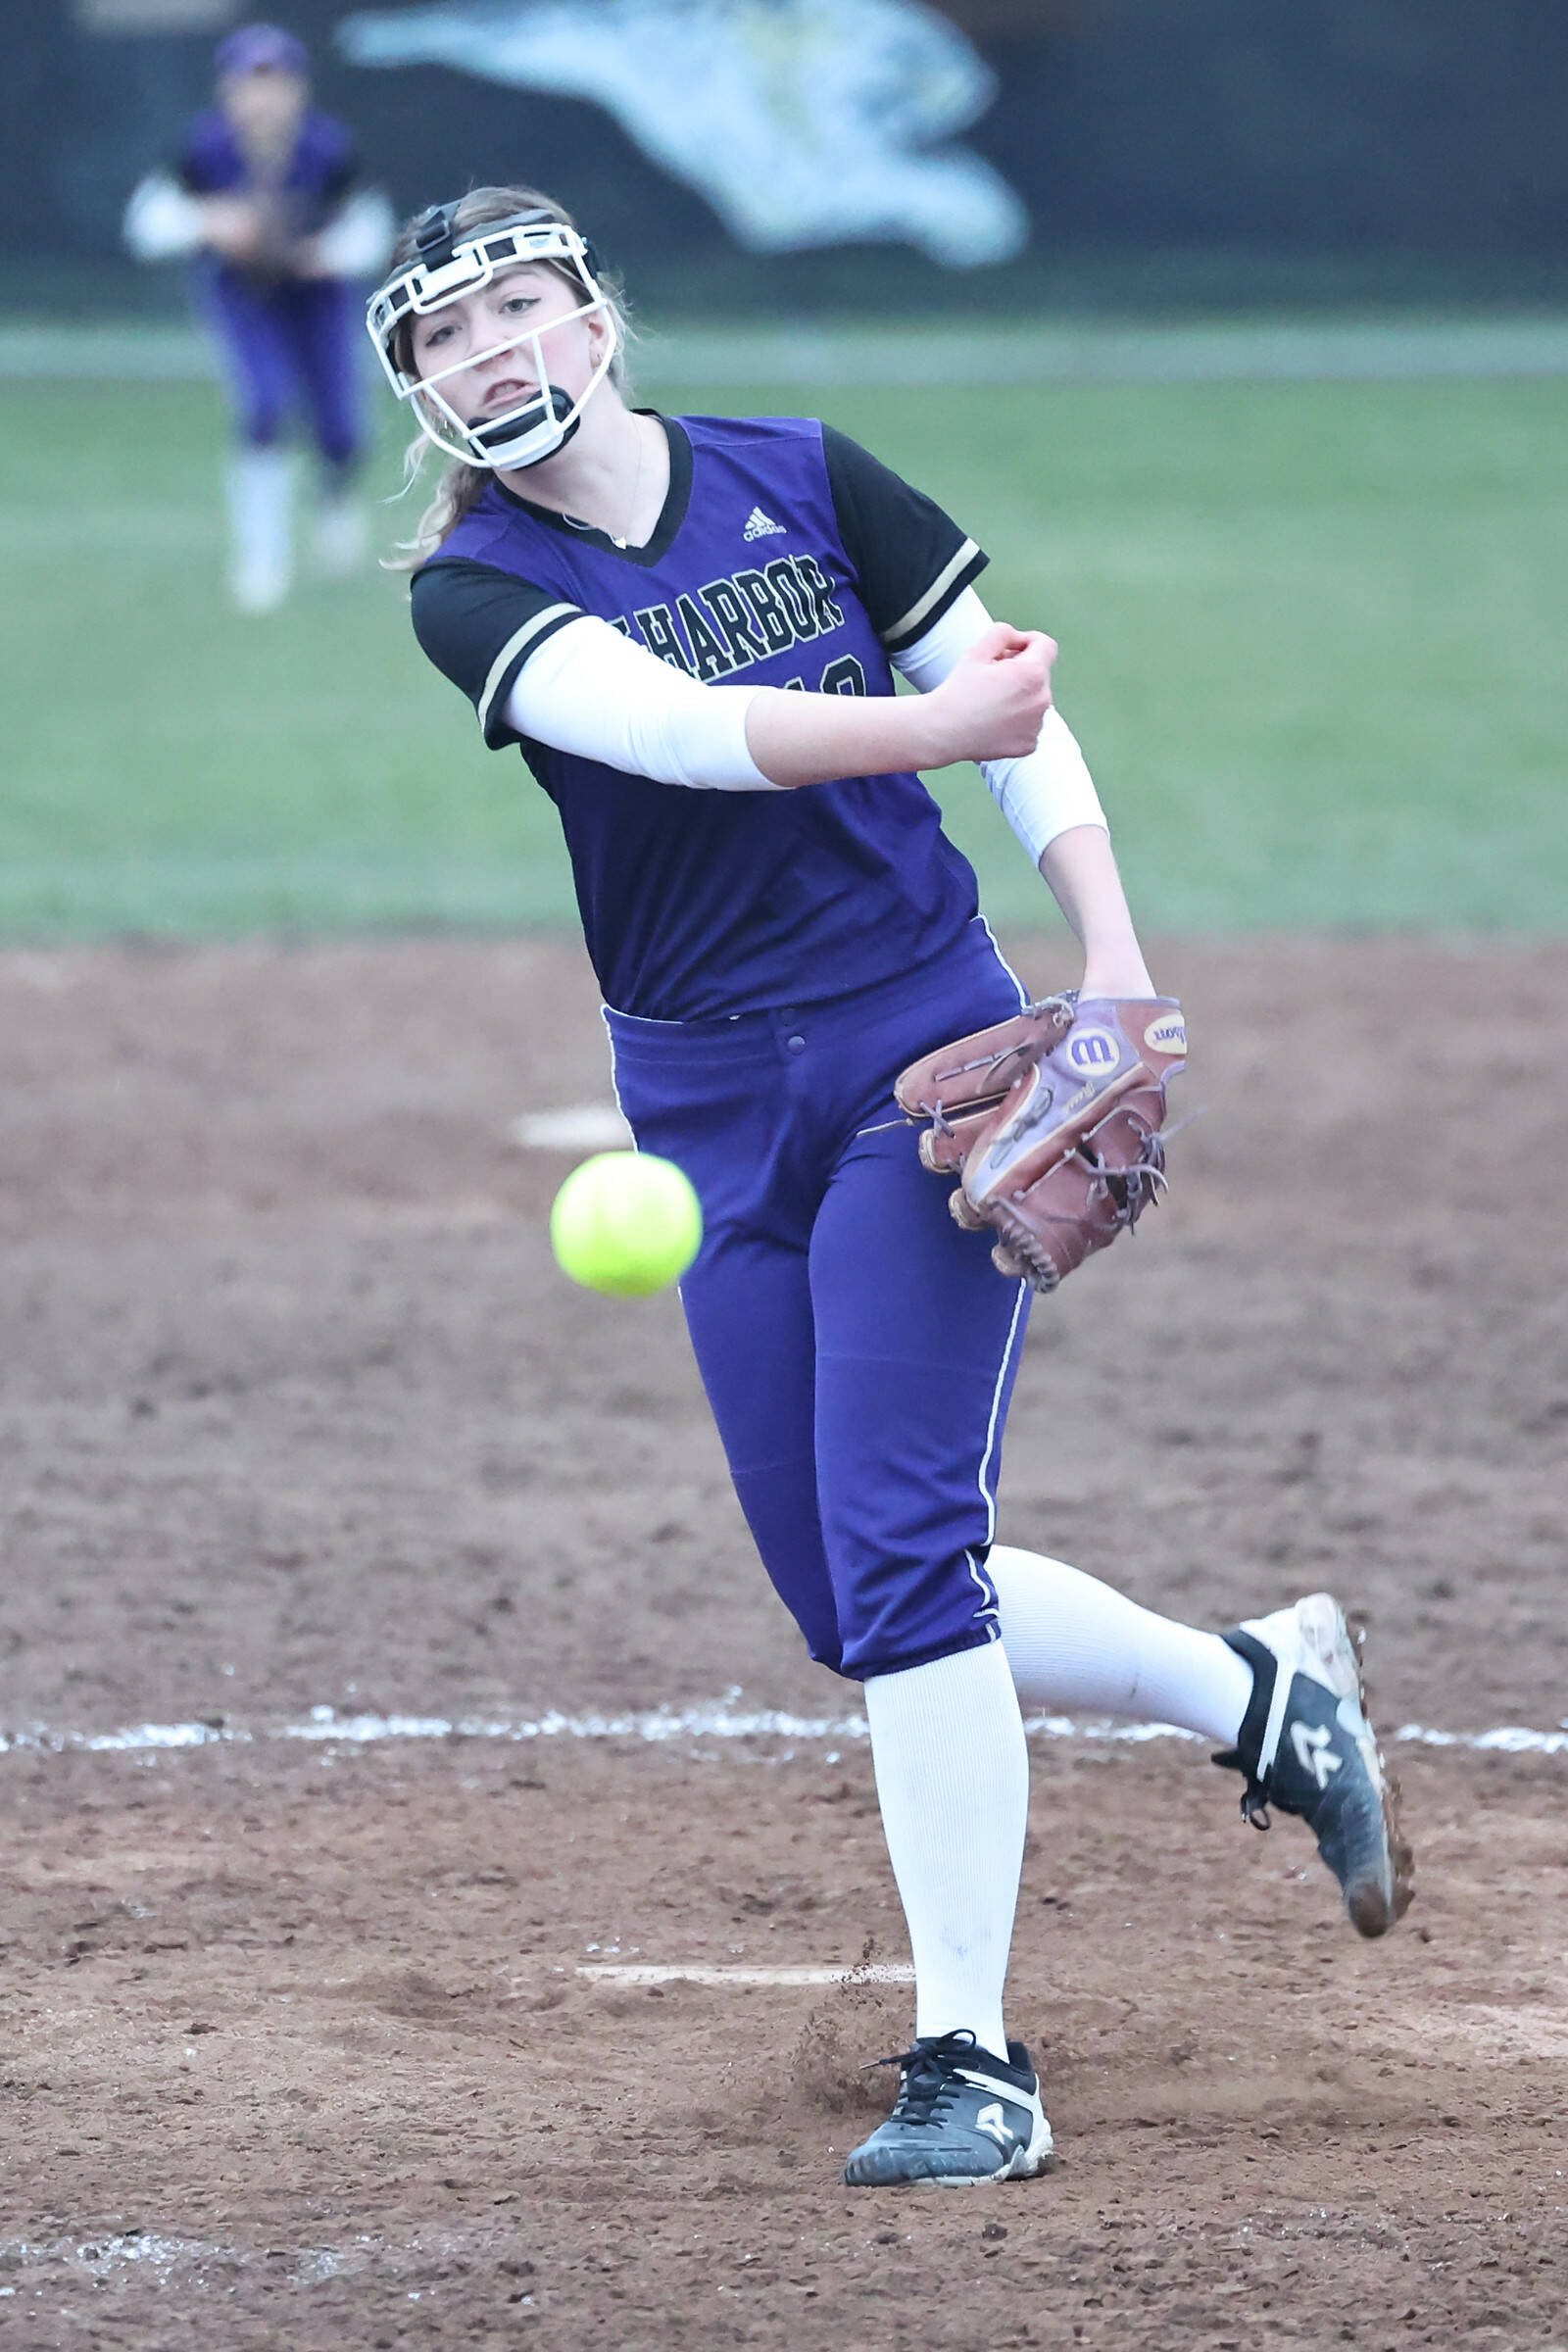 Oak Harbor athlete Reese Wasinger throws the ball during a varsity softball game March 10. Wasinger claimed the win as the pitcher, striking out three batters, allowing one hit and one earned run.